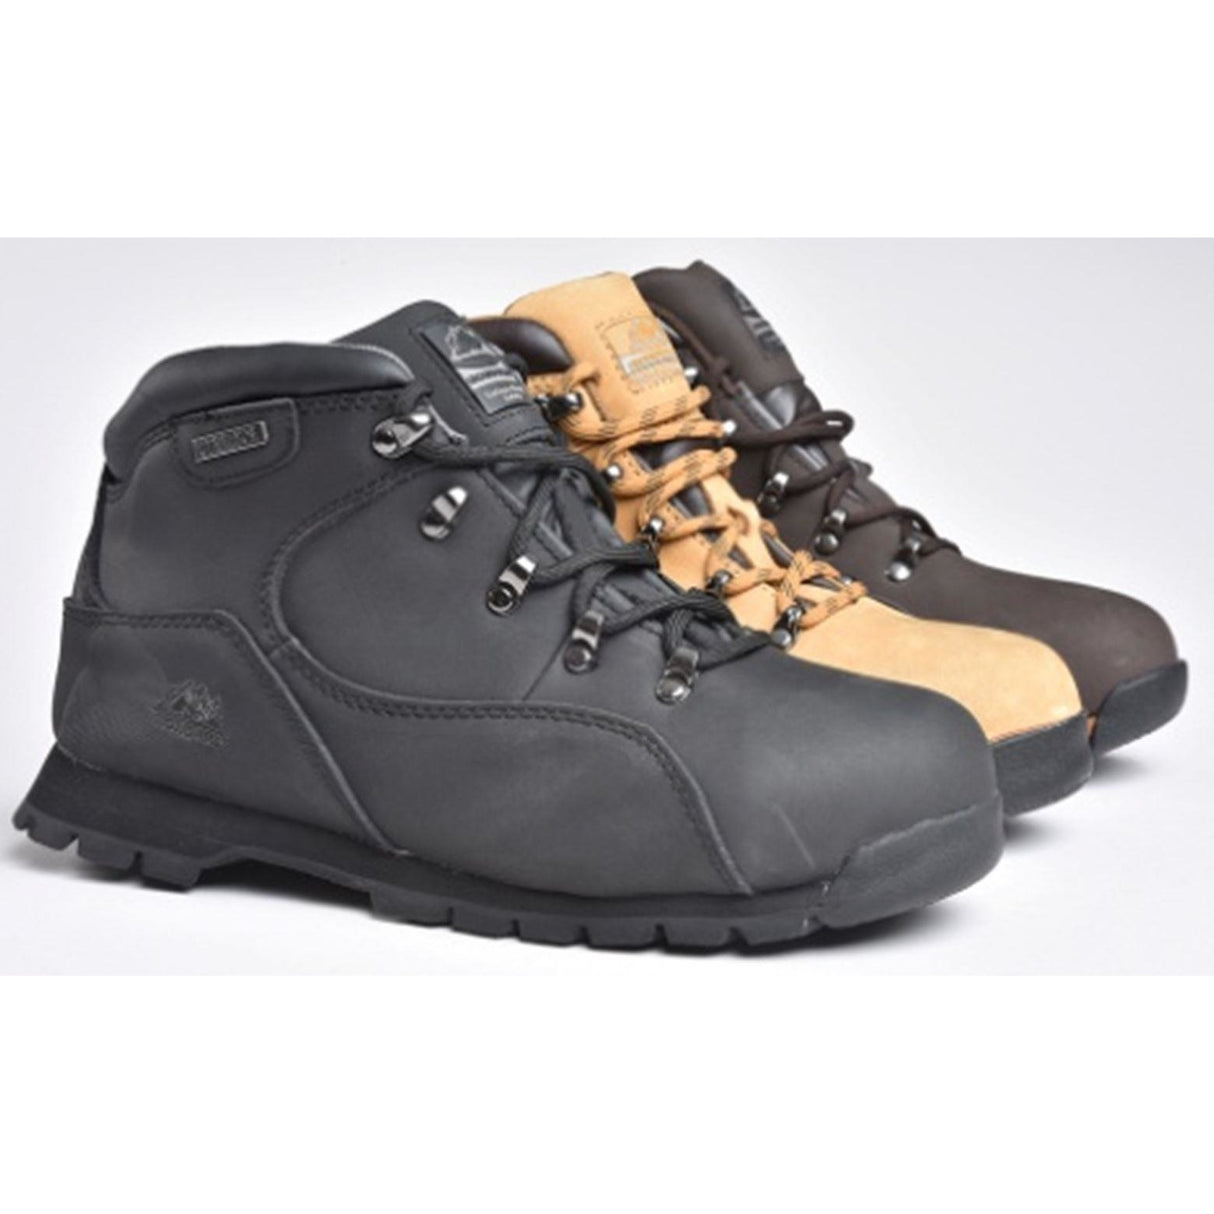 Groundwork Mens Adult Safety Boots